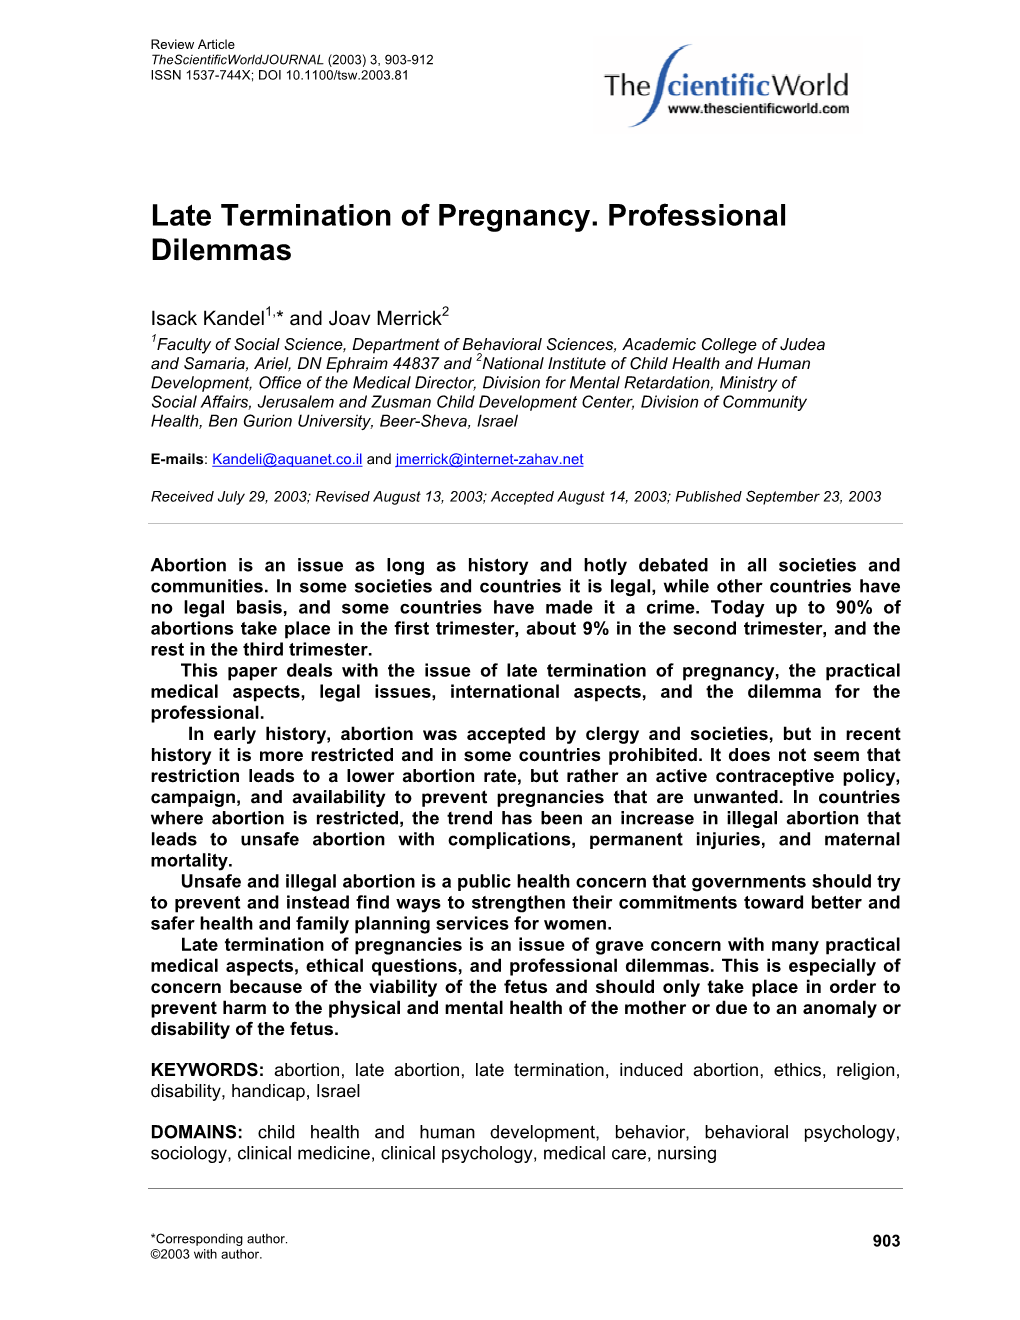 Late Termination of Pregnancy. Professional Dilemmas